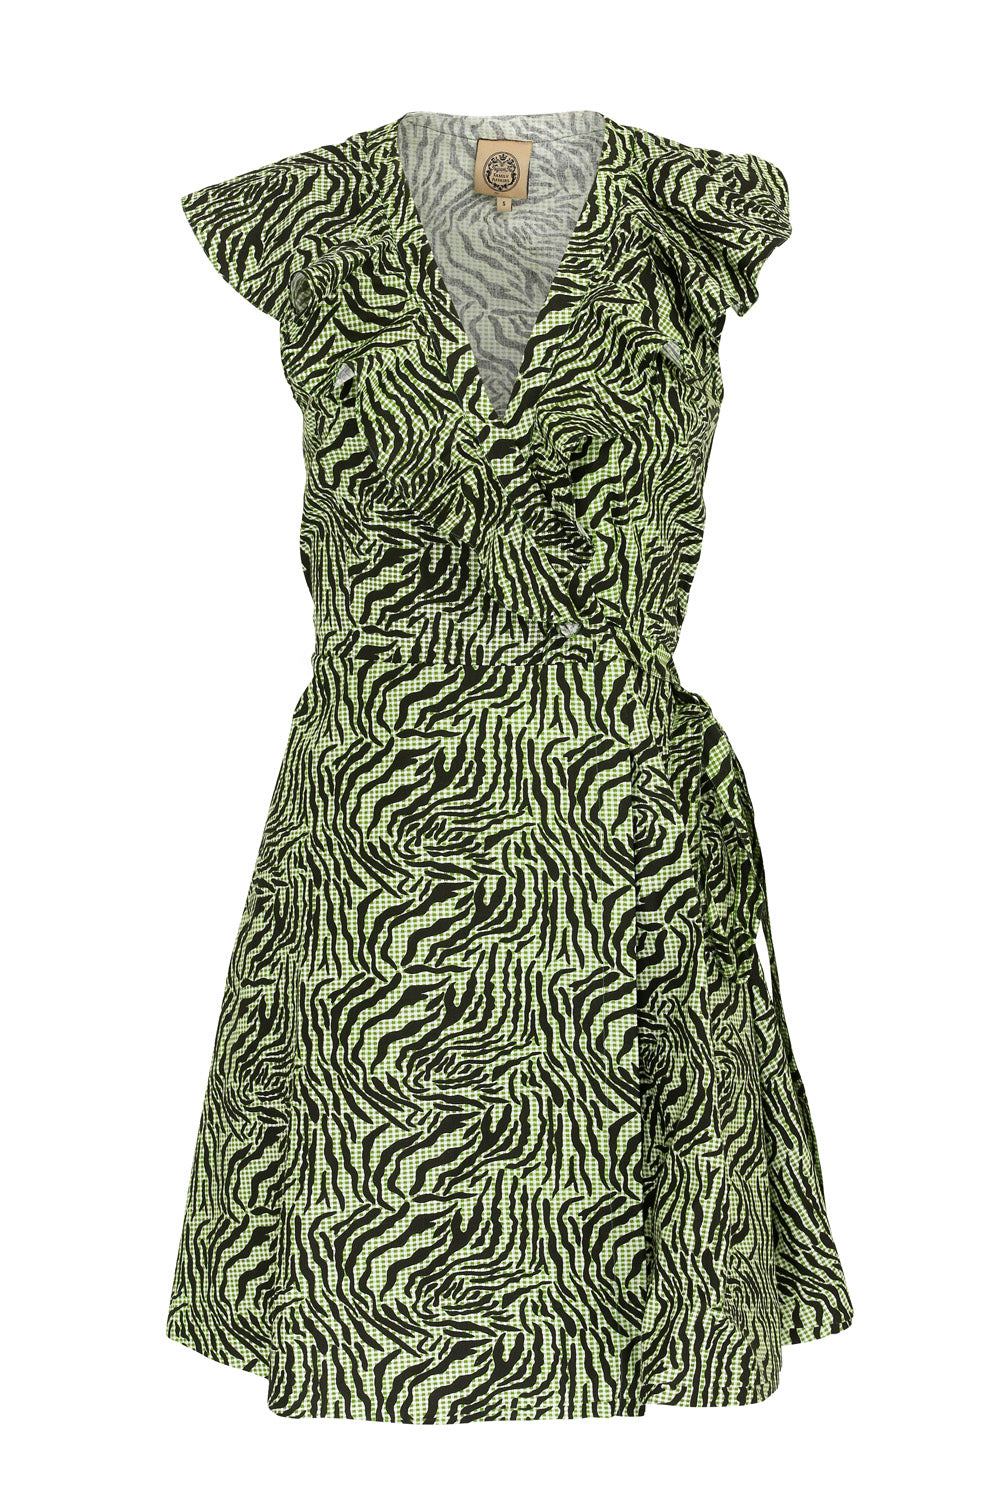 Agave Green dress - Family Affairs